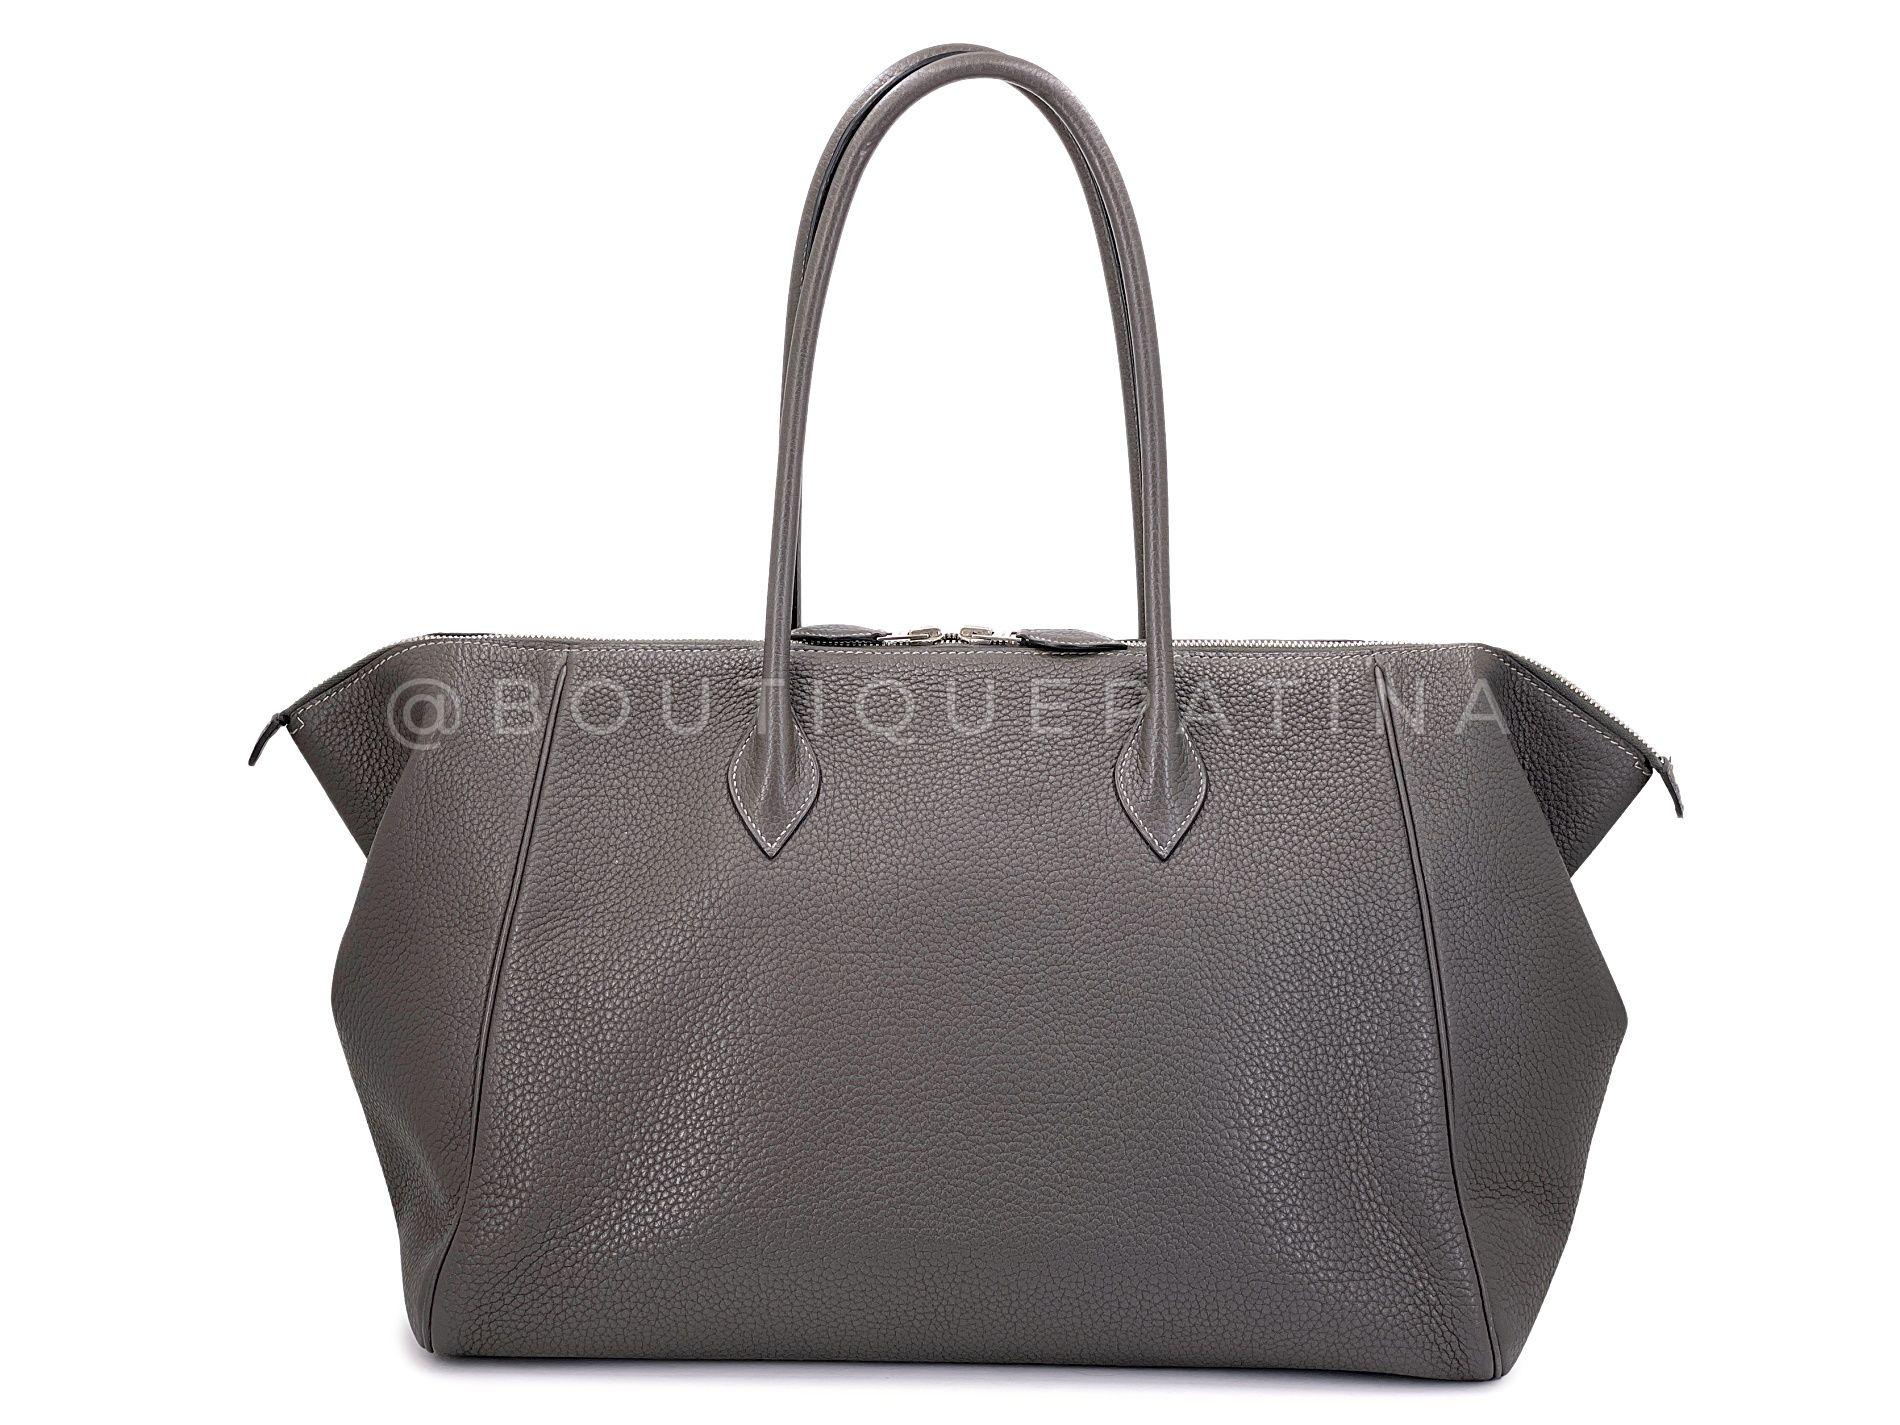 Hermès Etoupe Clemence Paris Bombay 37 Tote Bag PHW Taupe 68061 For Sale 1